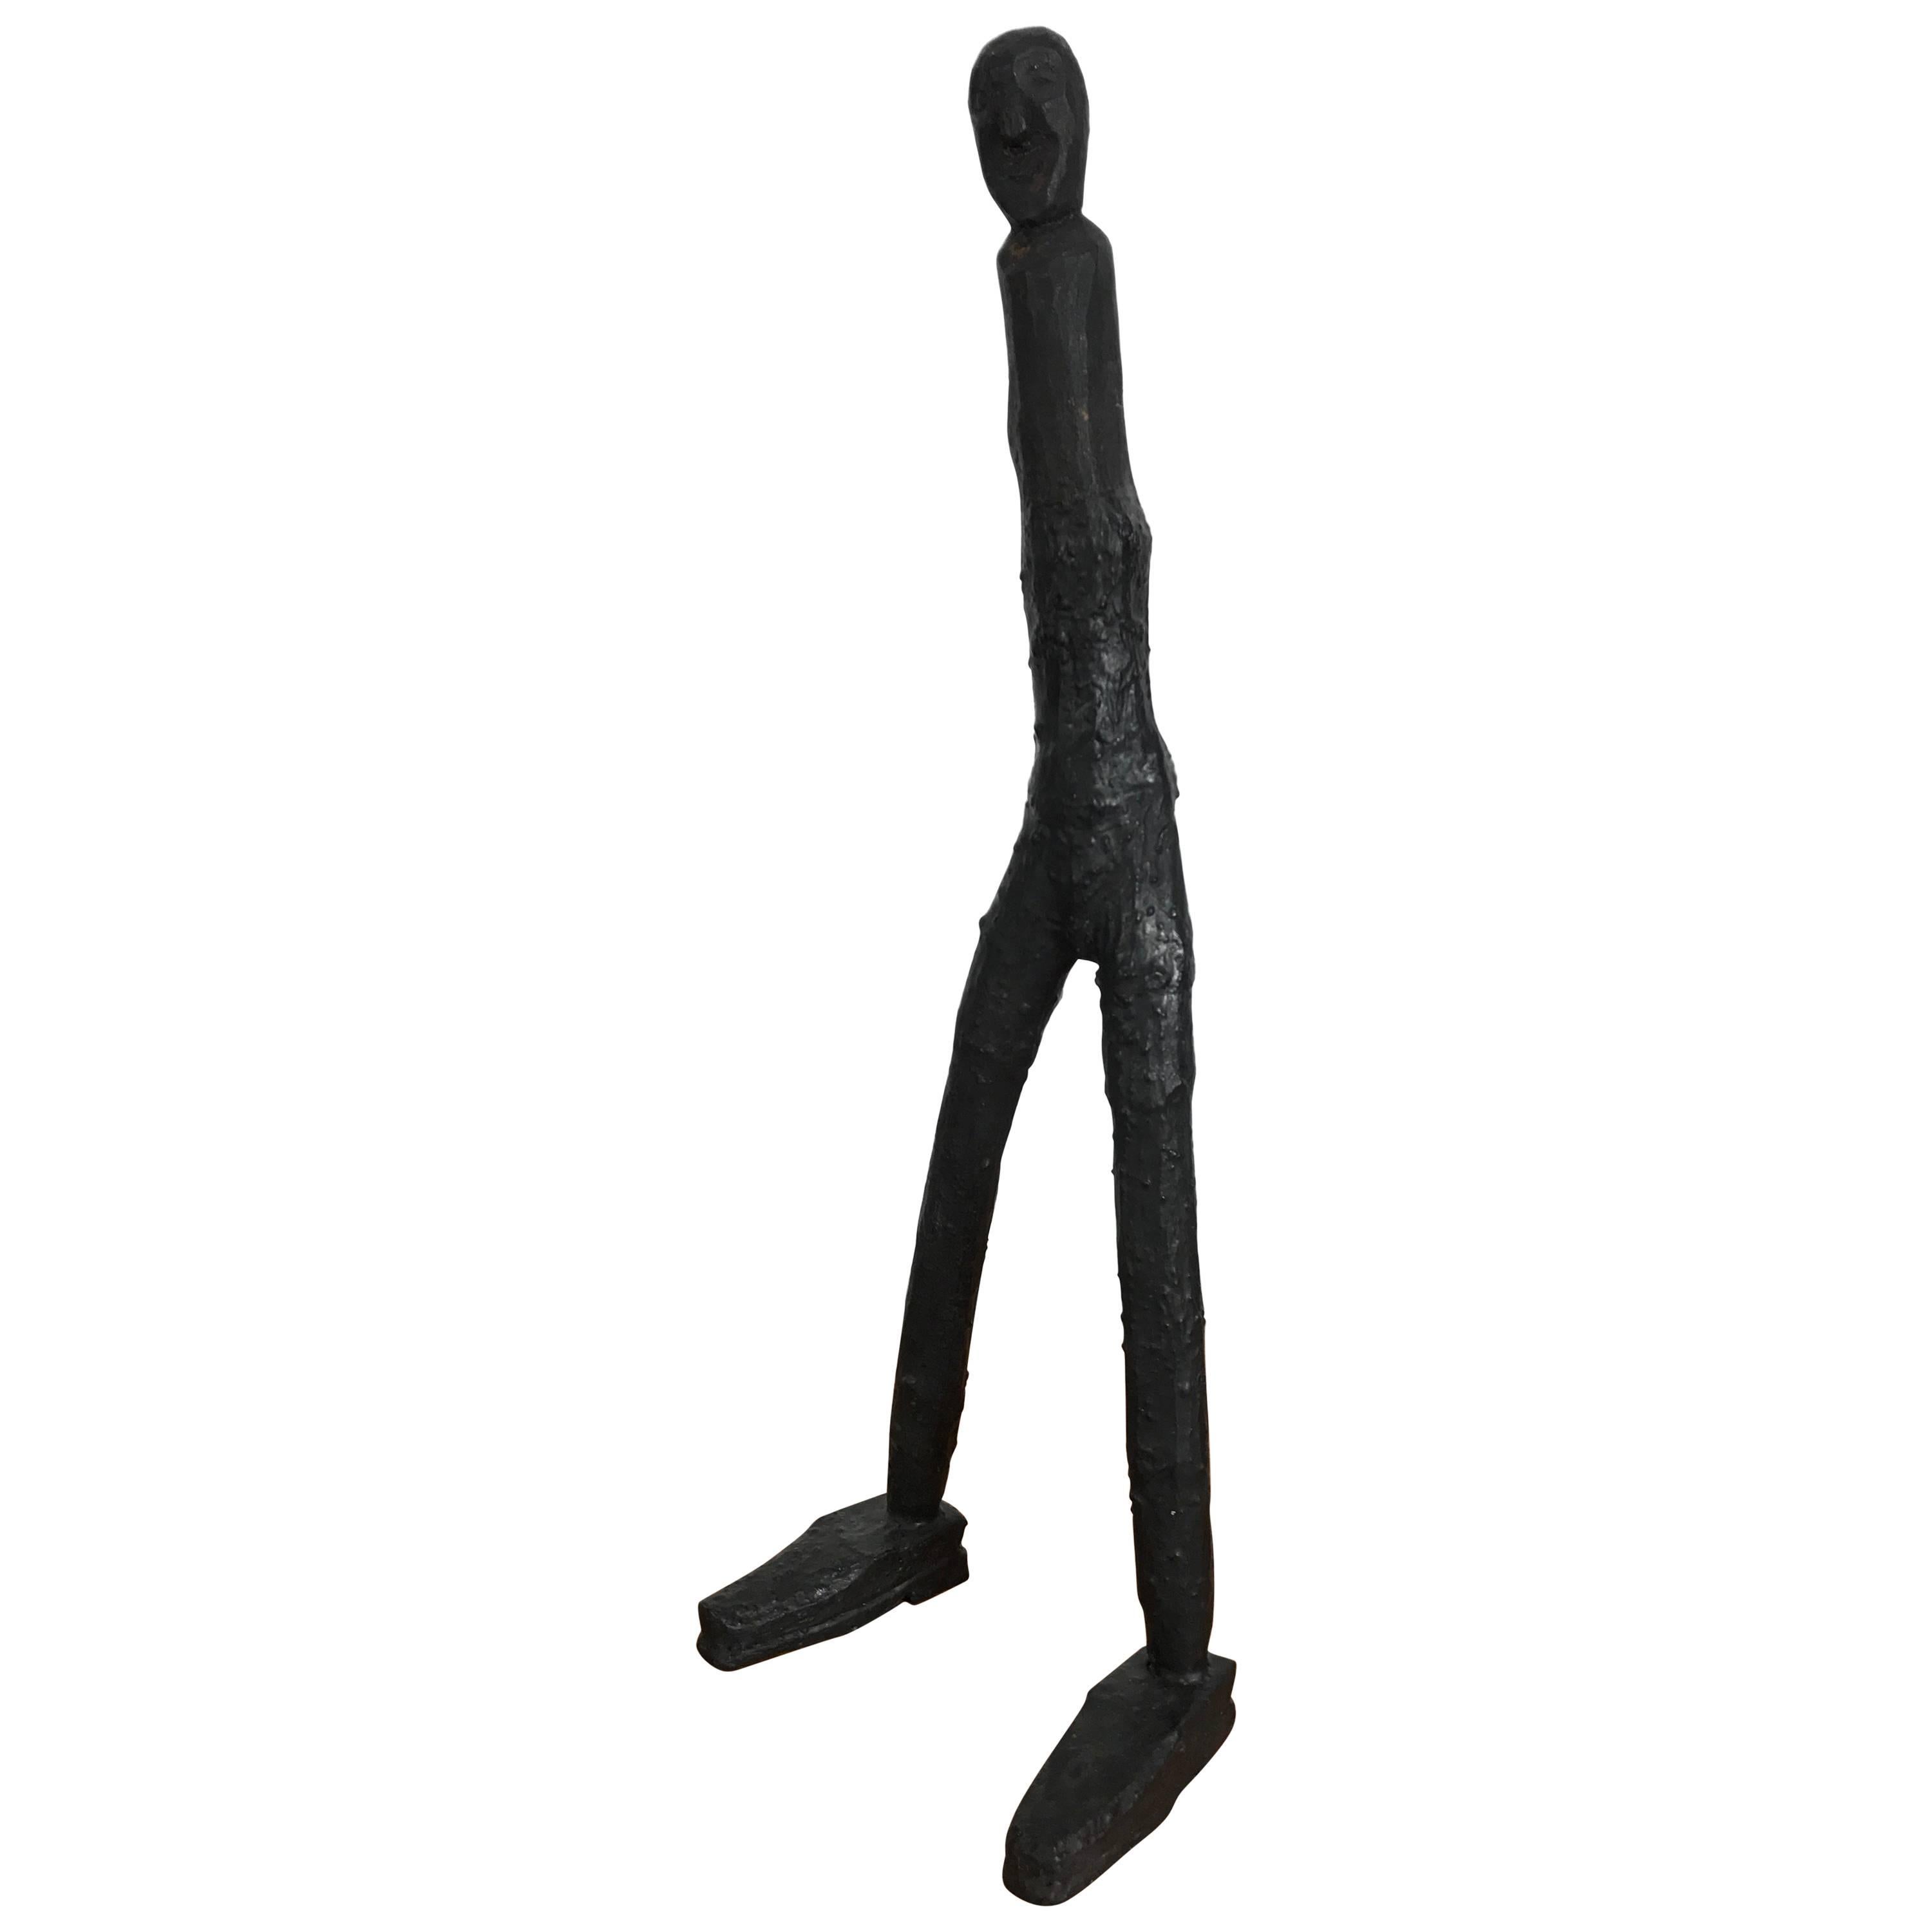 Folk Art "Standing Man" Carved Tree Branch Sculpture After Giocometti For Sale